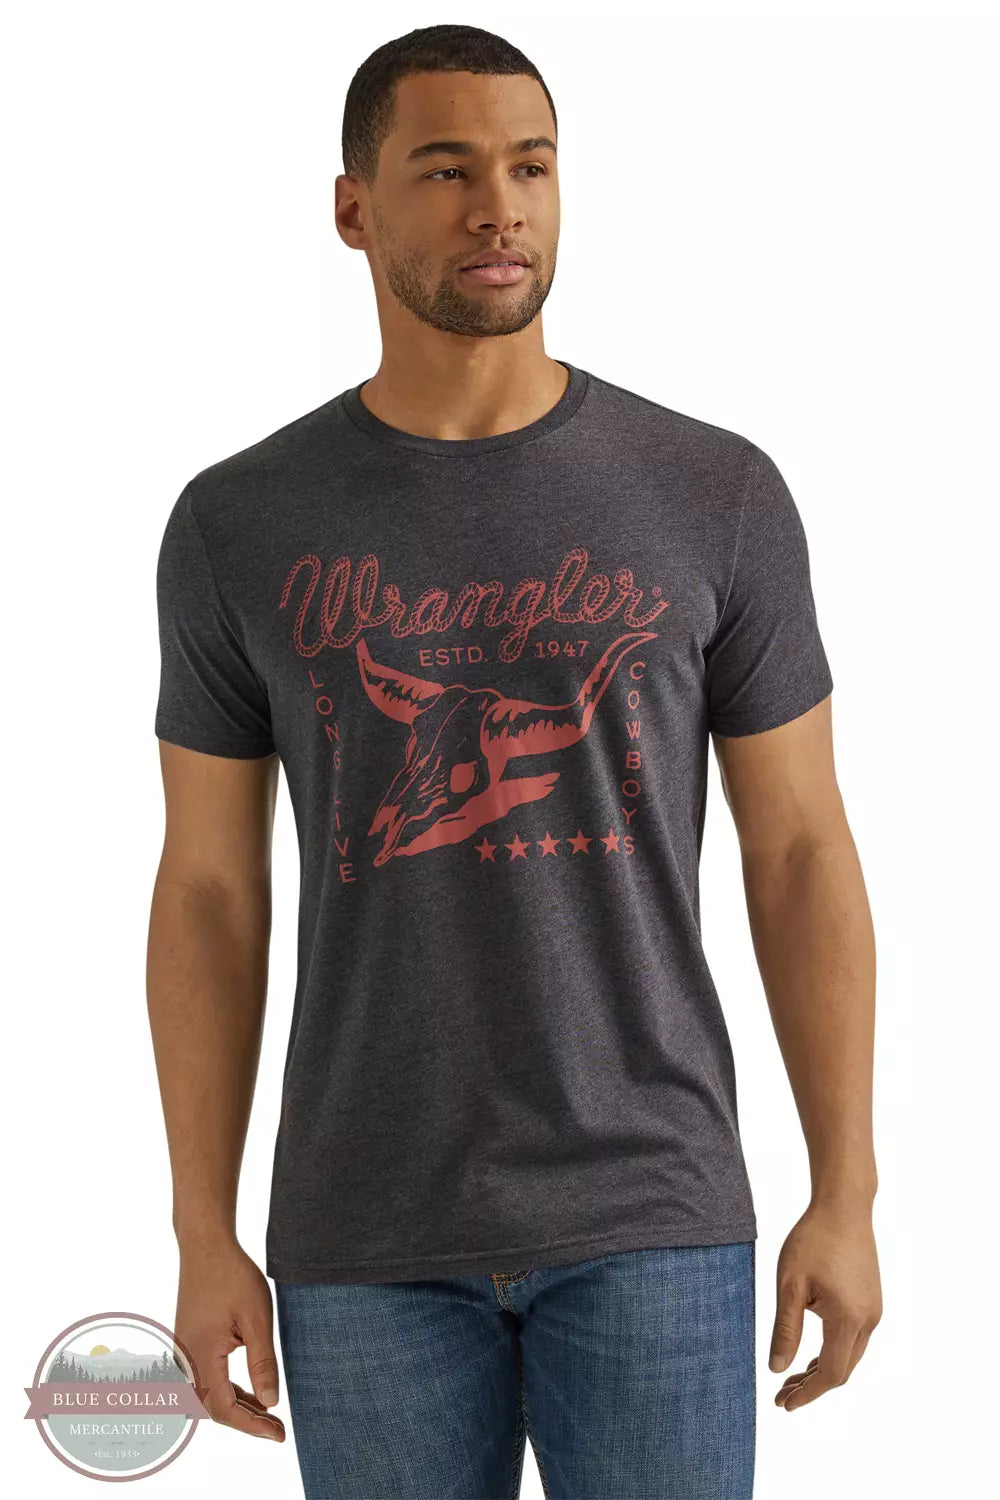 Wrangler 112344112 Year-Round T-Shirt in Caviar Heather Front View